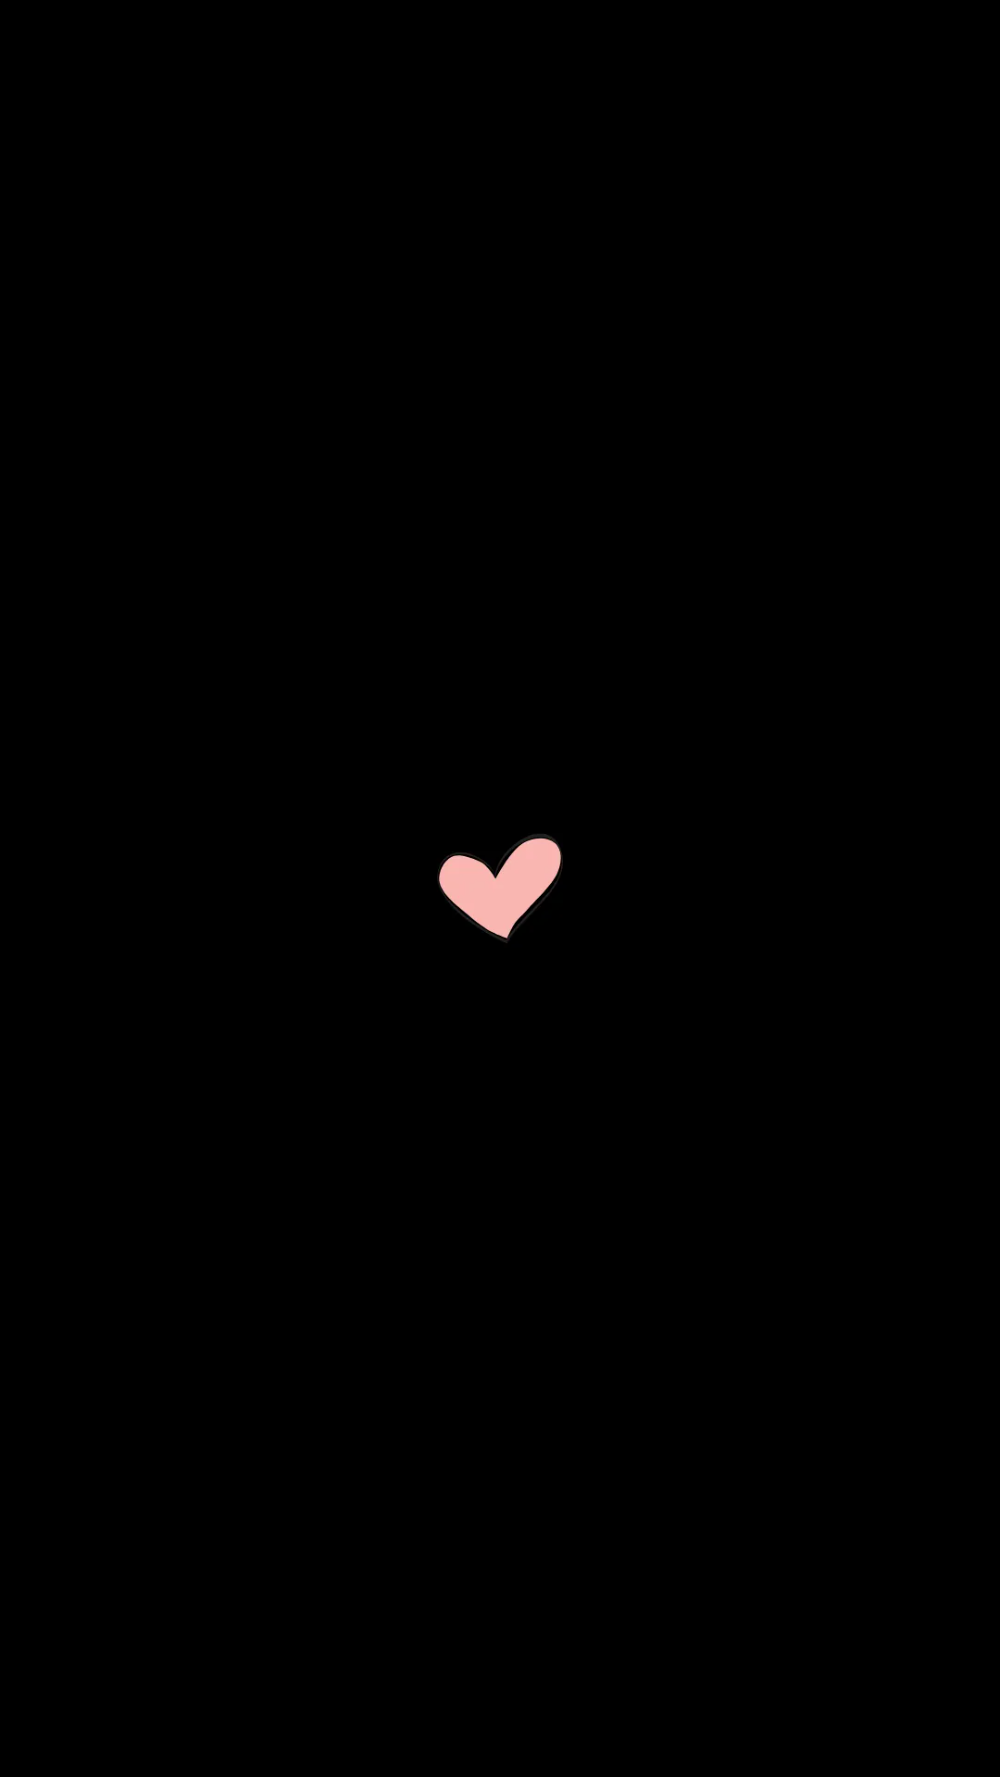 Love Heart Background Black and White 🖤🤍 Ending Heart Tunnel Background  Video Loop - YouTube